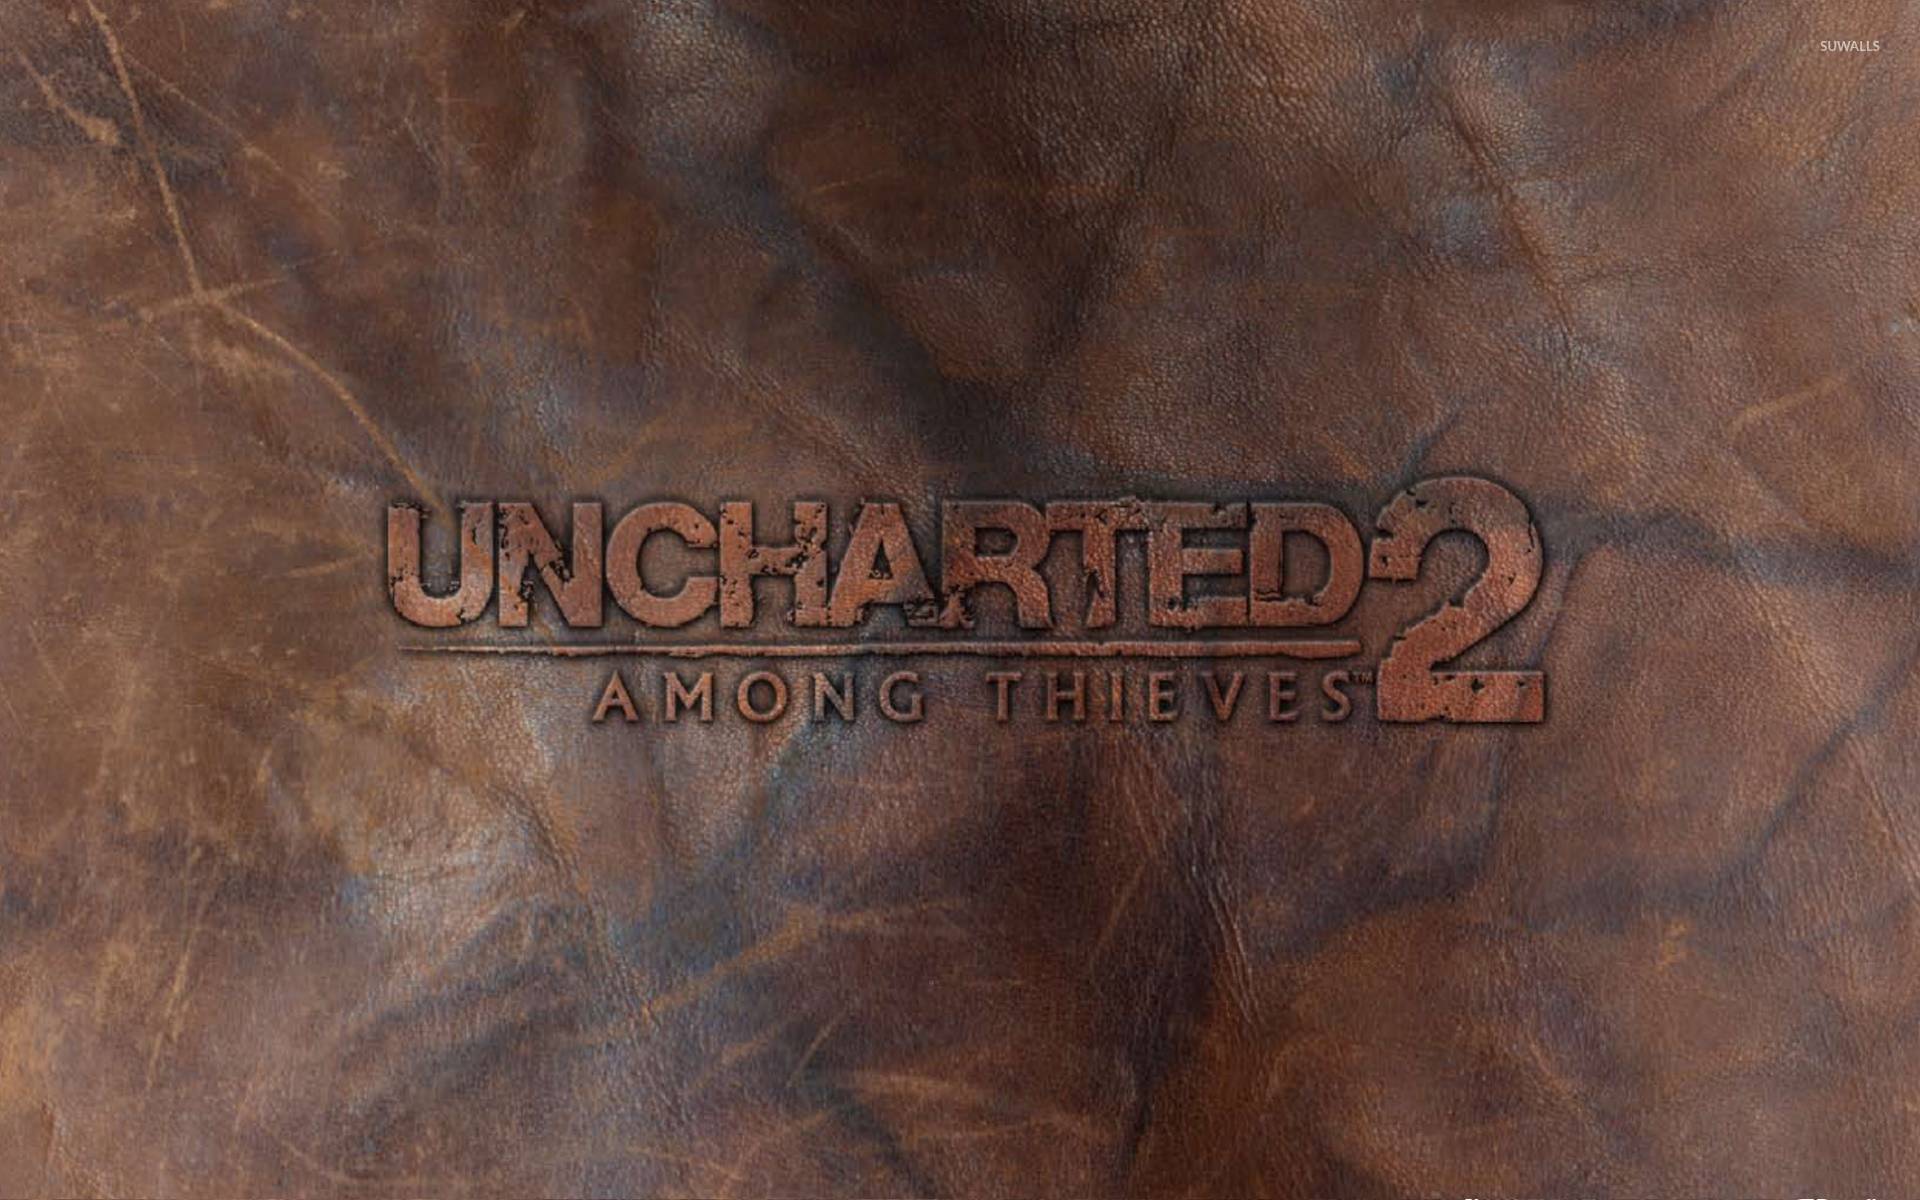 Uncharted 2: Among Thieves [3] wallpaper wallpaper